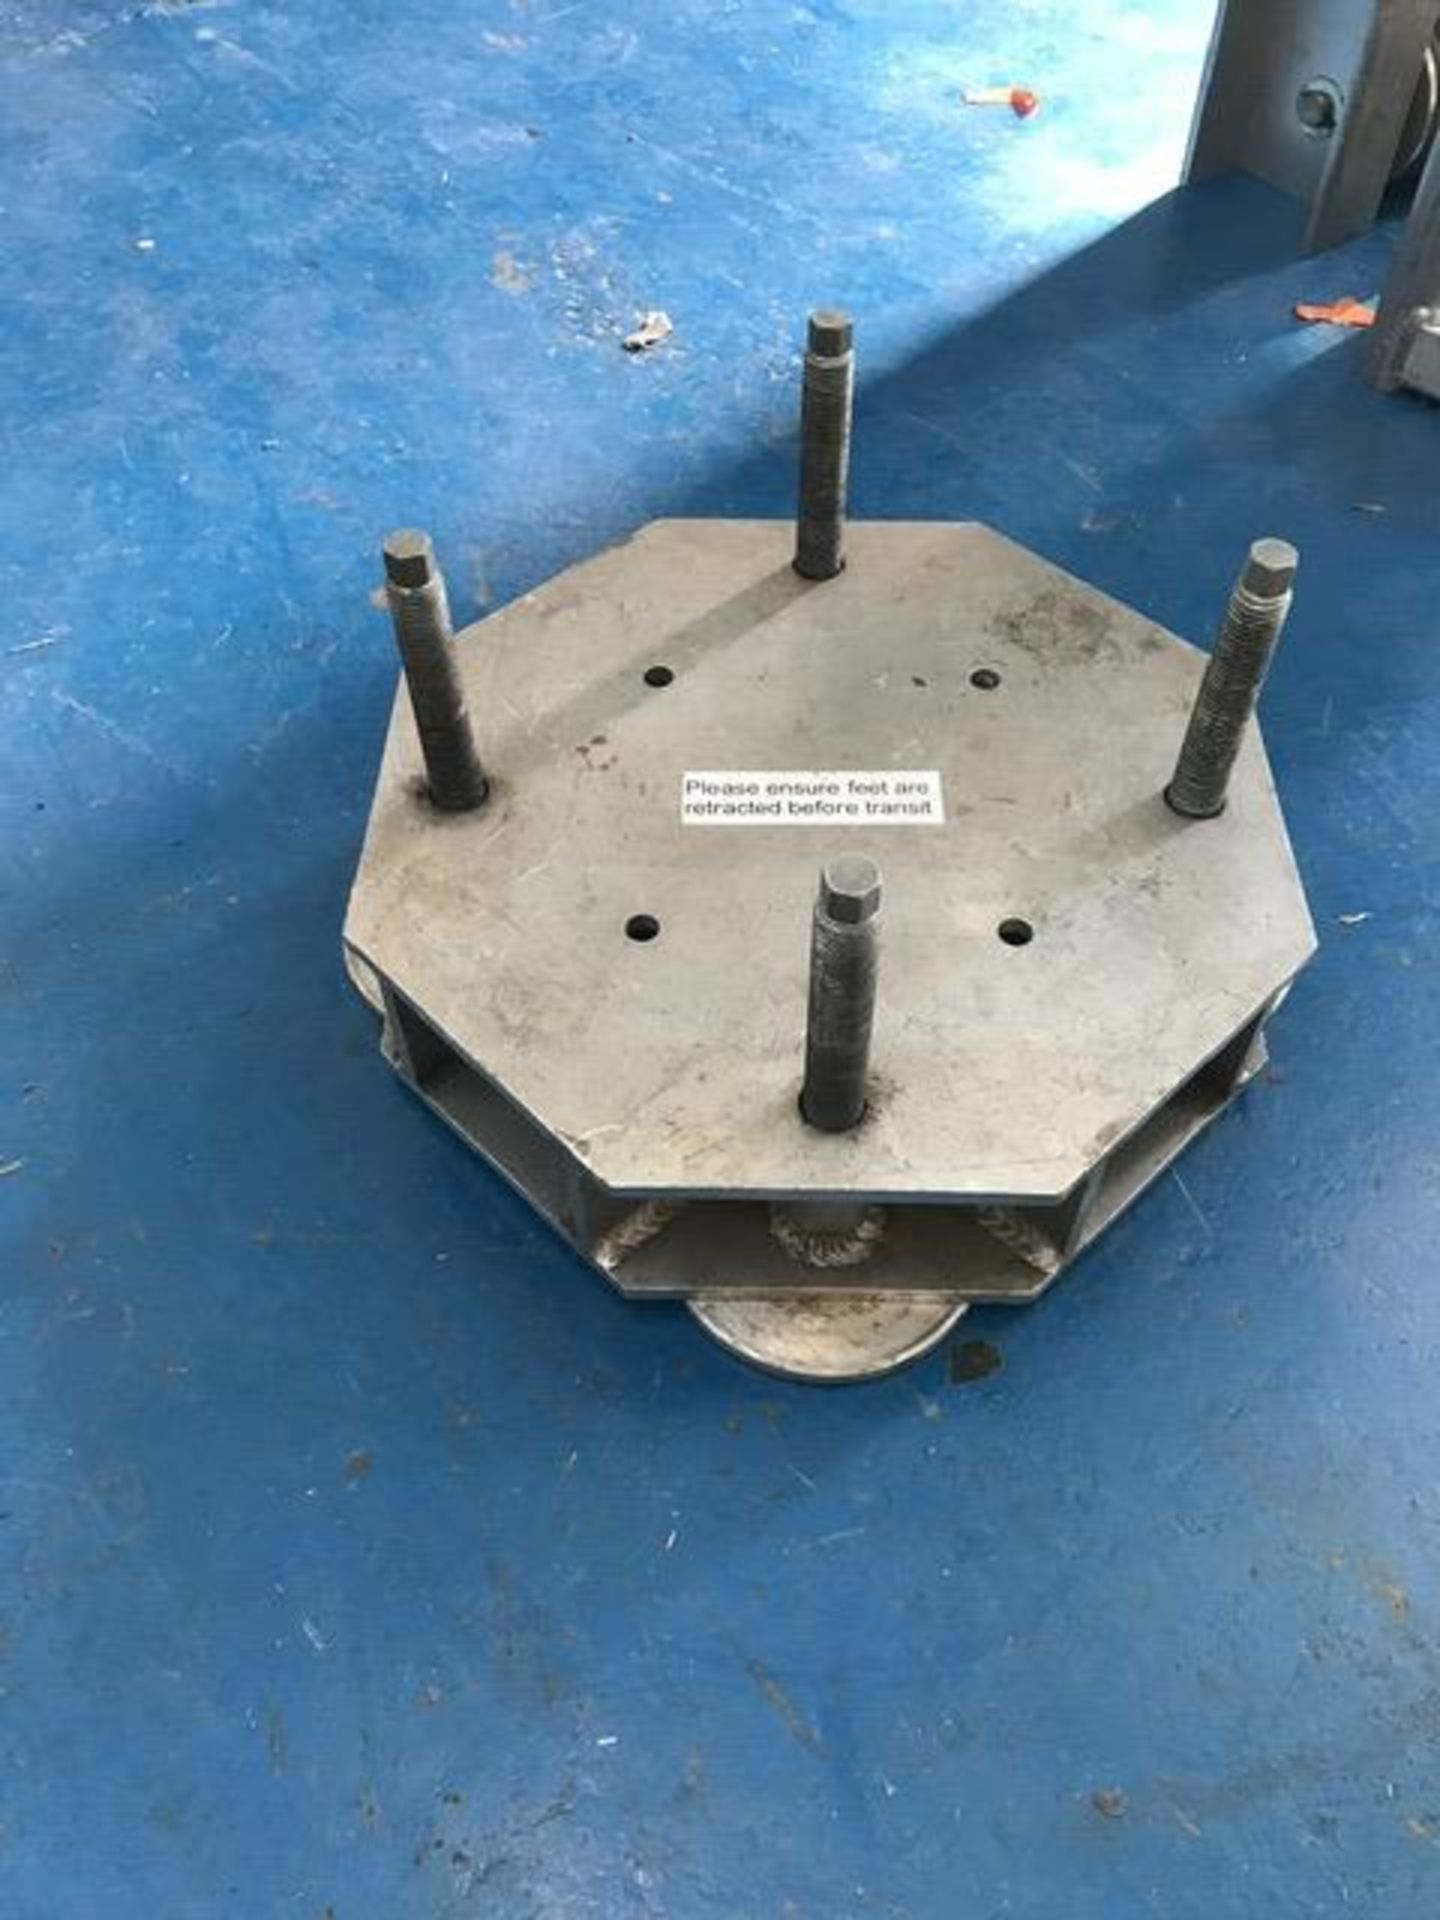 Tomcat 12inch Ground Support Foot Plate- 123278. Ex-Hire, Fair Condition - This lot is included